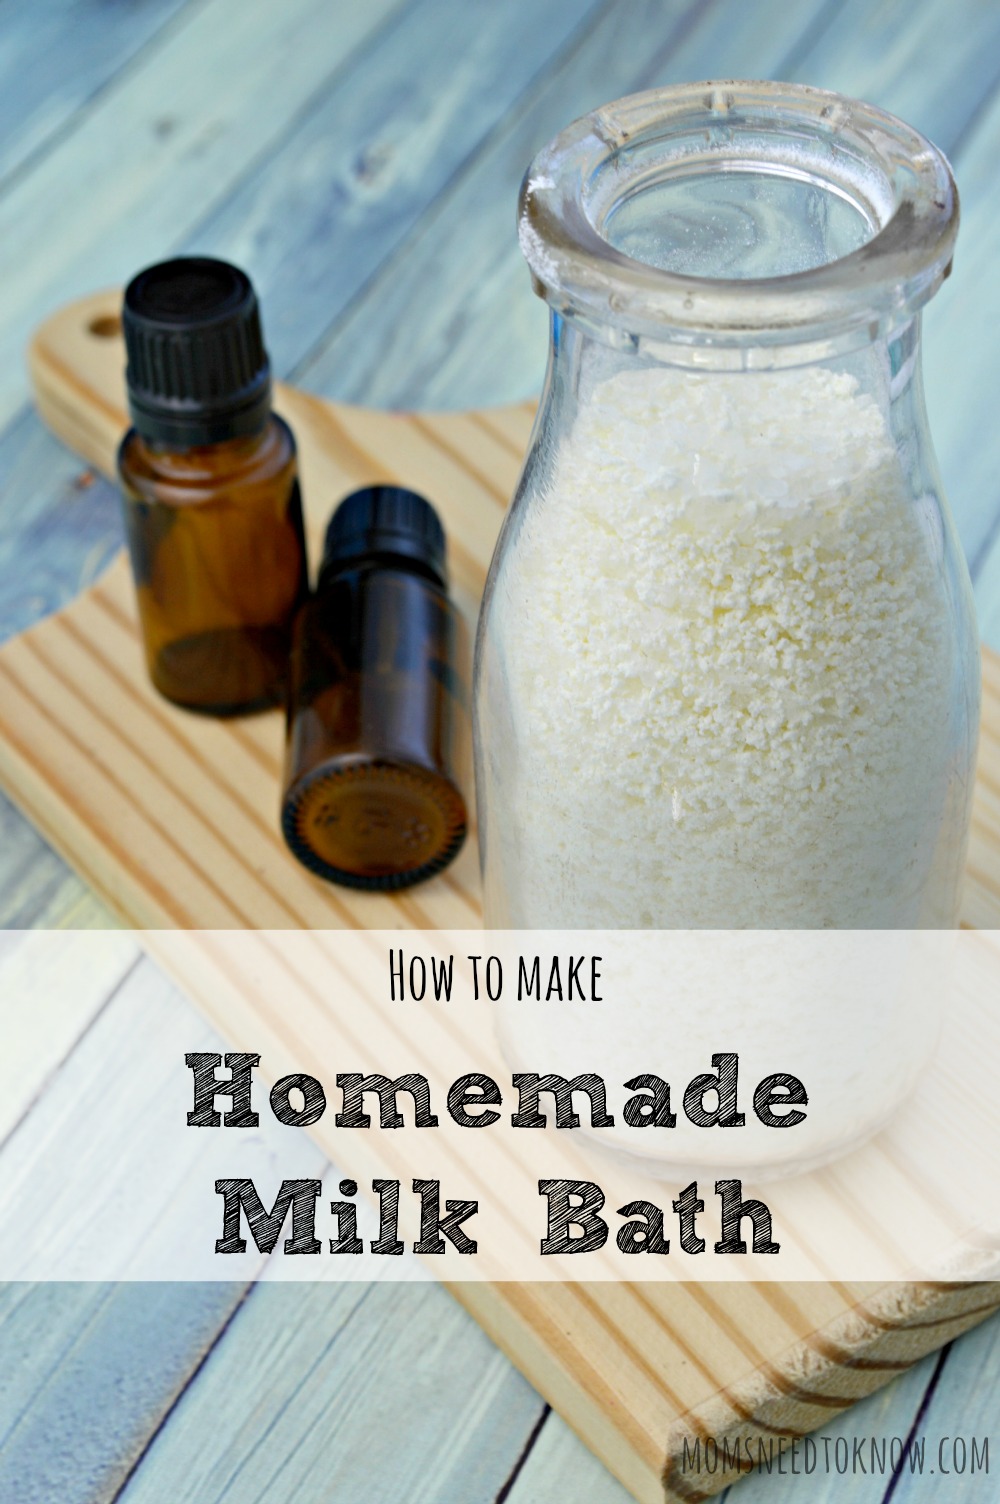 This homemade milk bath recipe will leave your skin feeling soft and supple, refreshed and invigorated! It's so easy to make and would be a great gift!